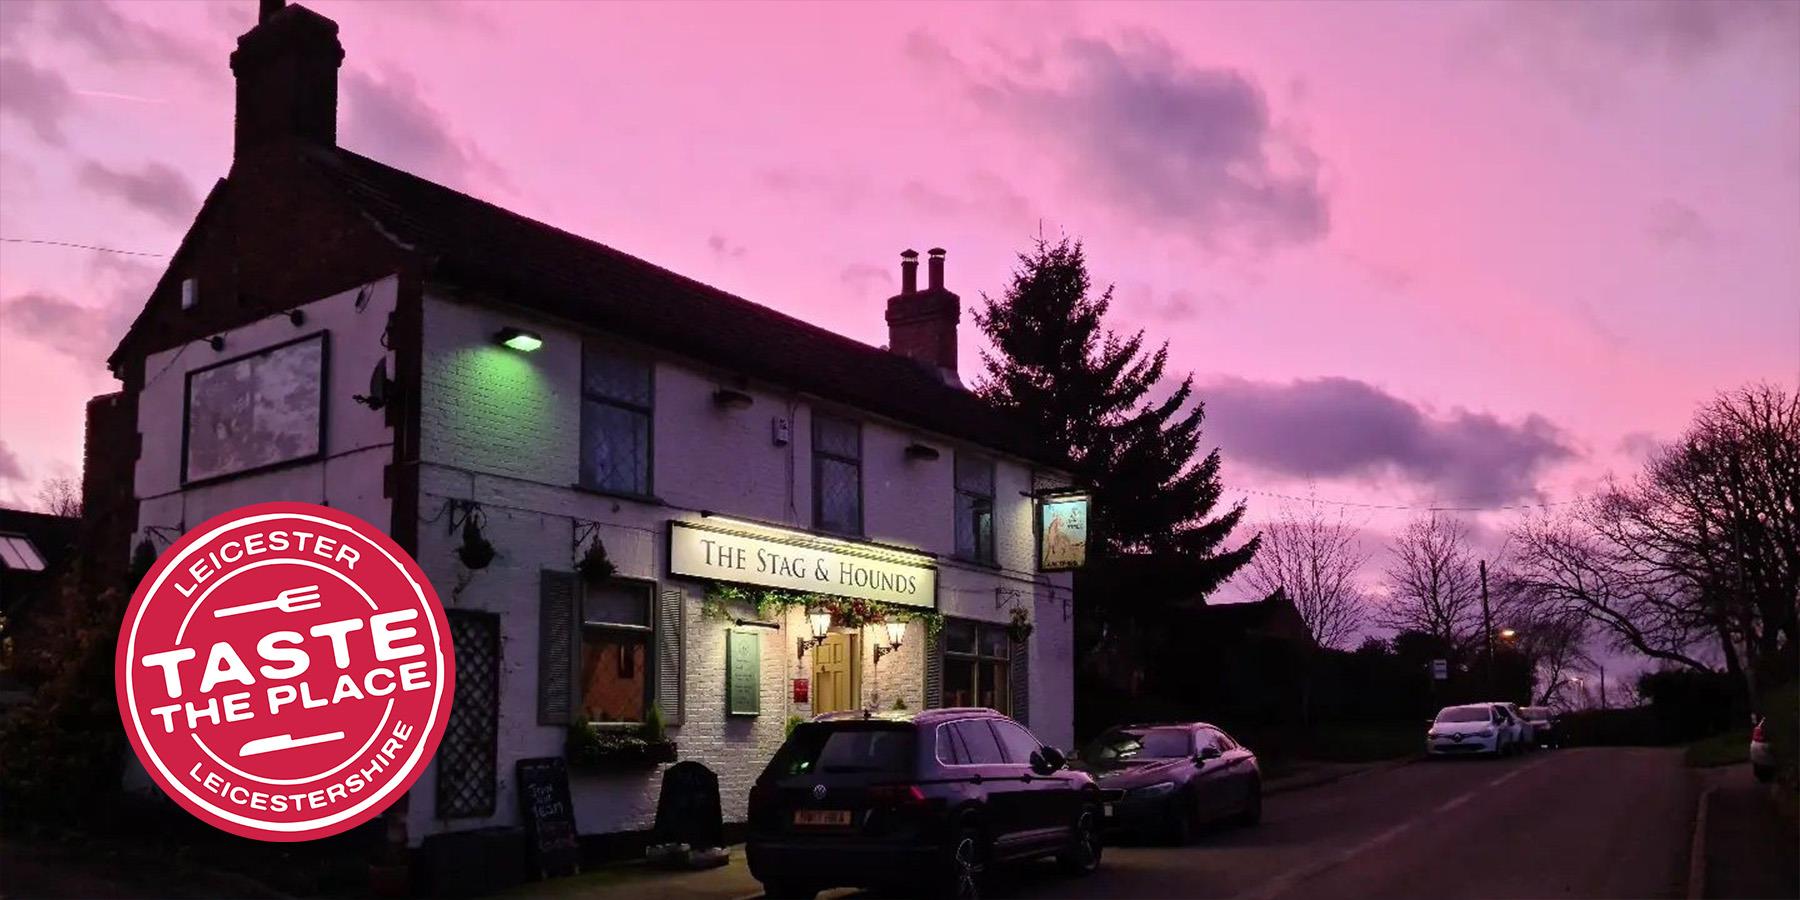 The Stag and Hounds pub under a sunset